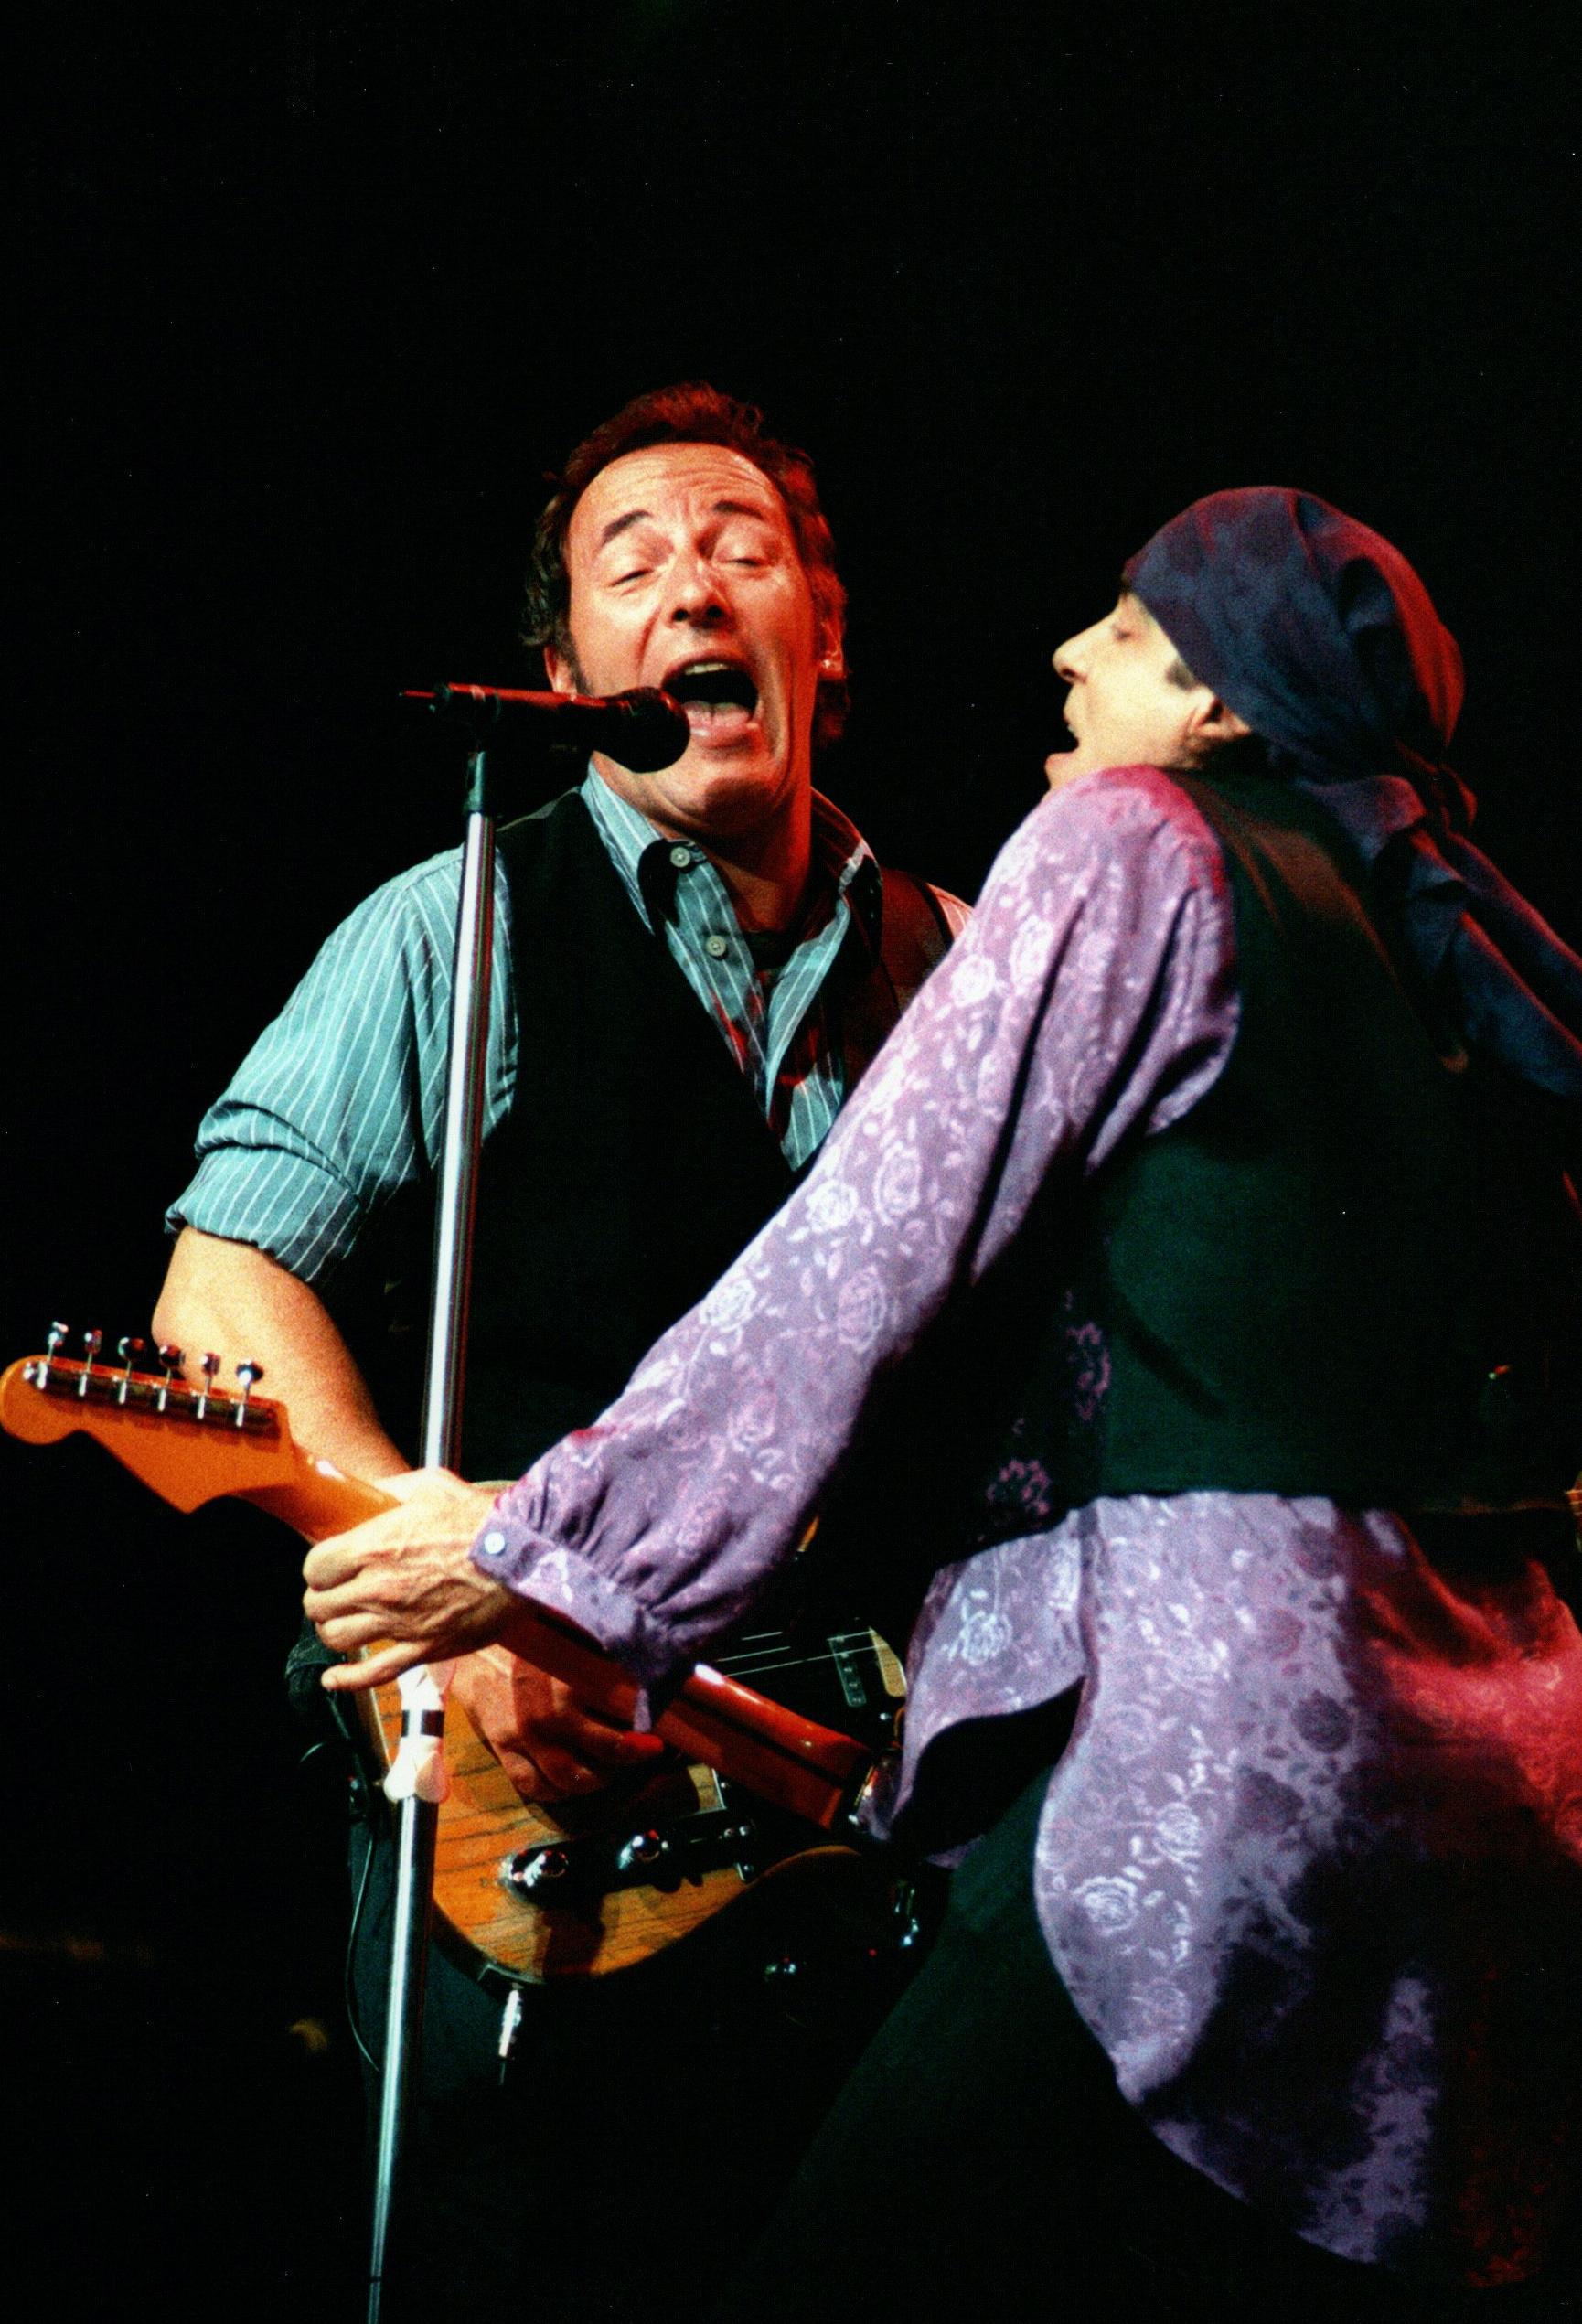 Kelly Swift Color Photograph - Bruce Springsteen Performing with Steven Van Zandt Vintage Original Photograph